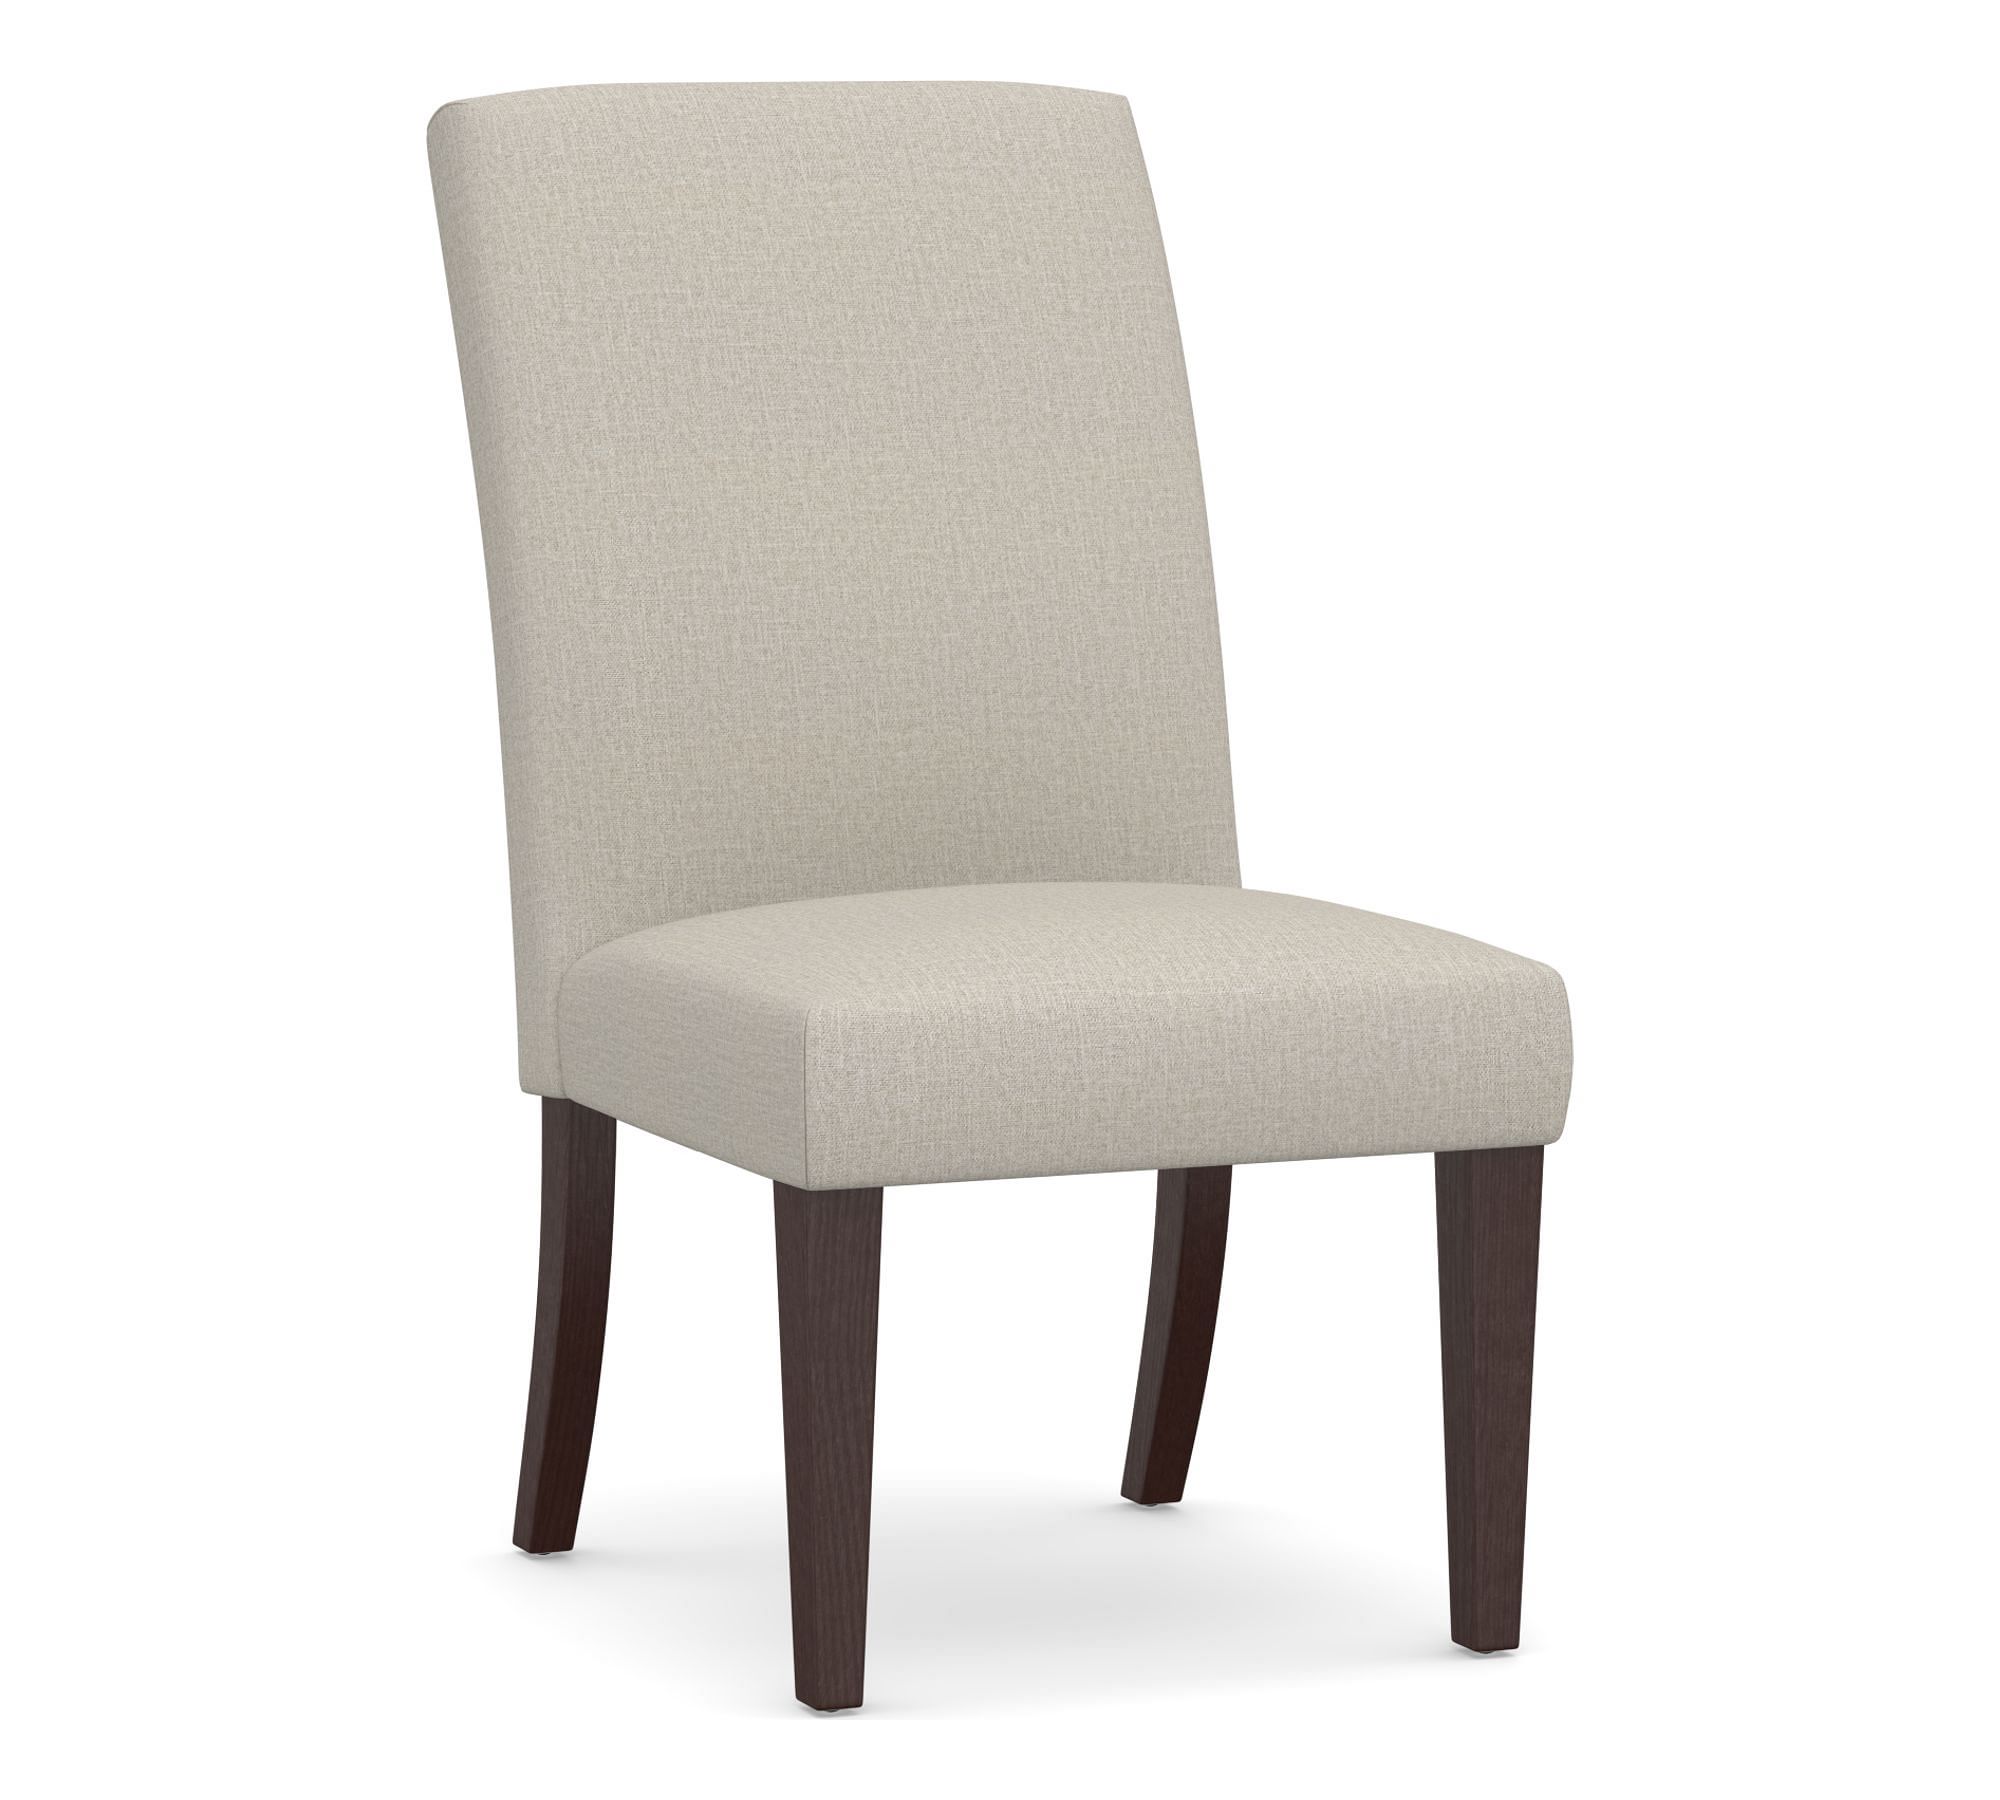 Open Box: PB Comfort Square Upholstered Dining Chair